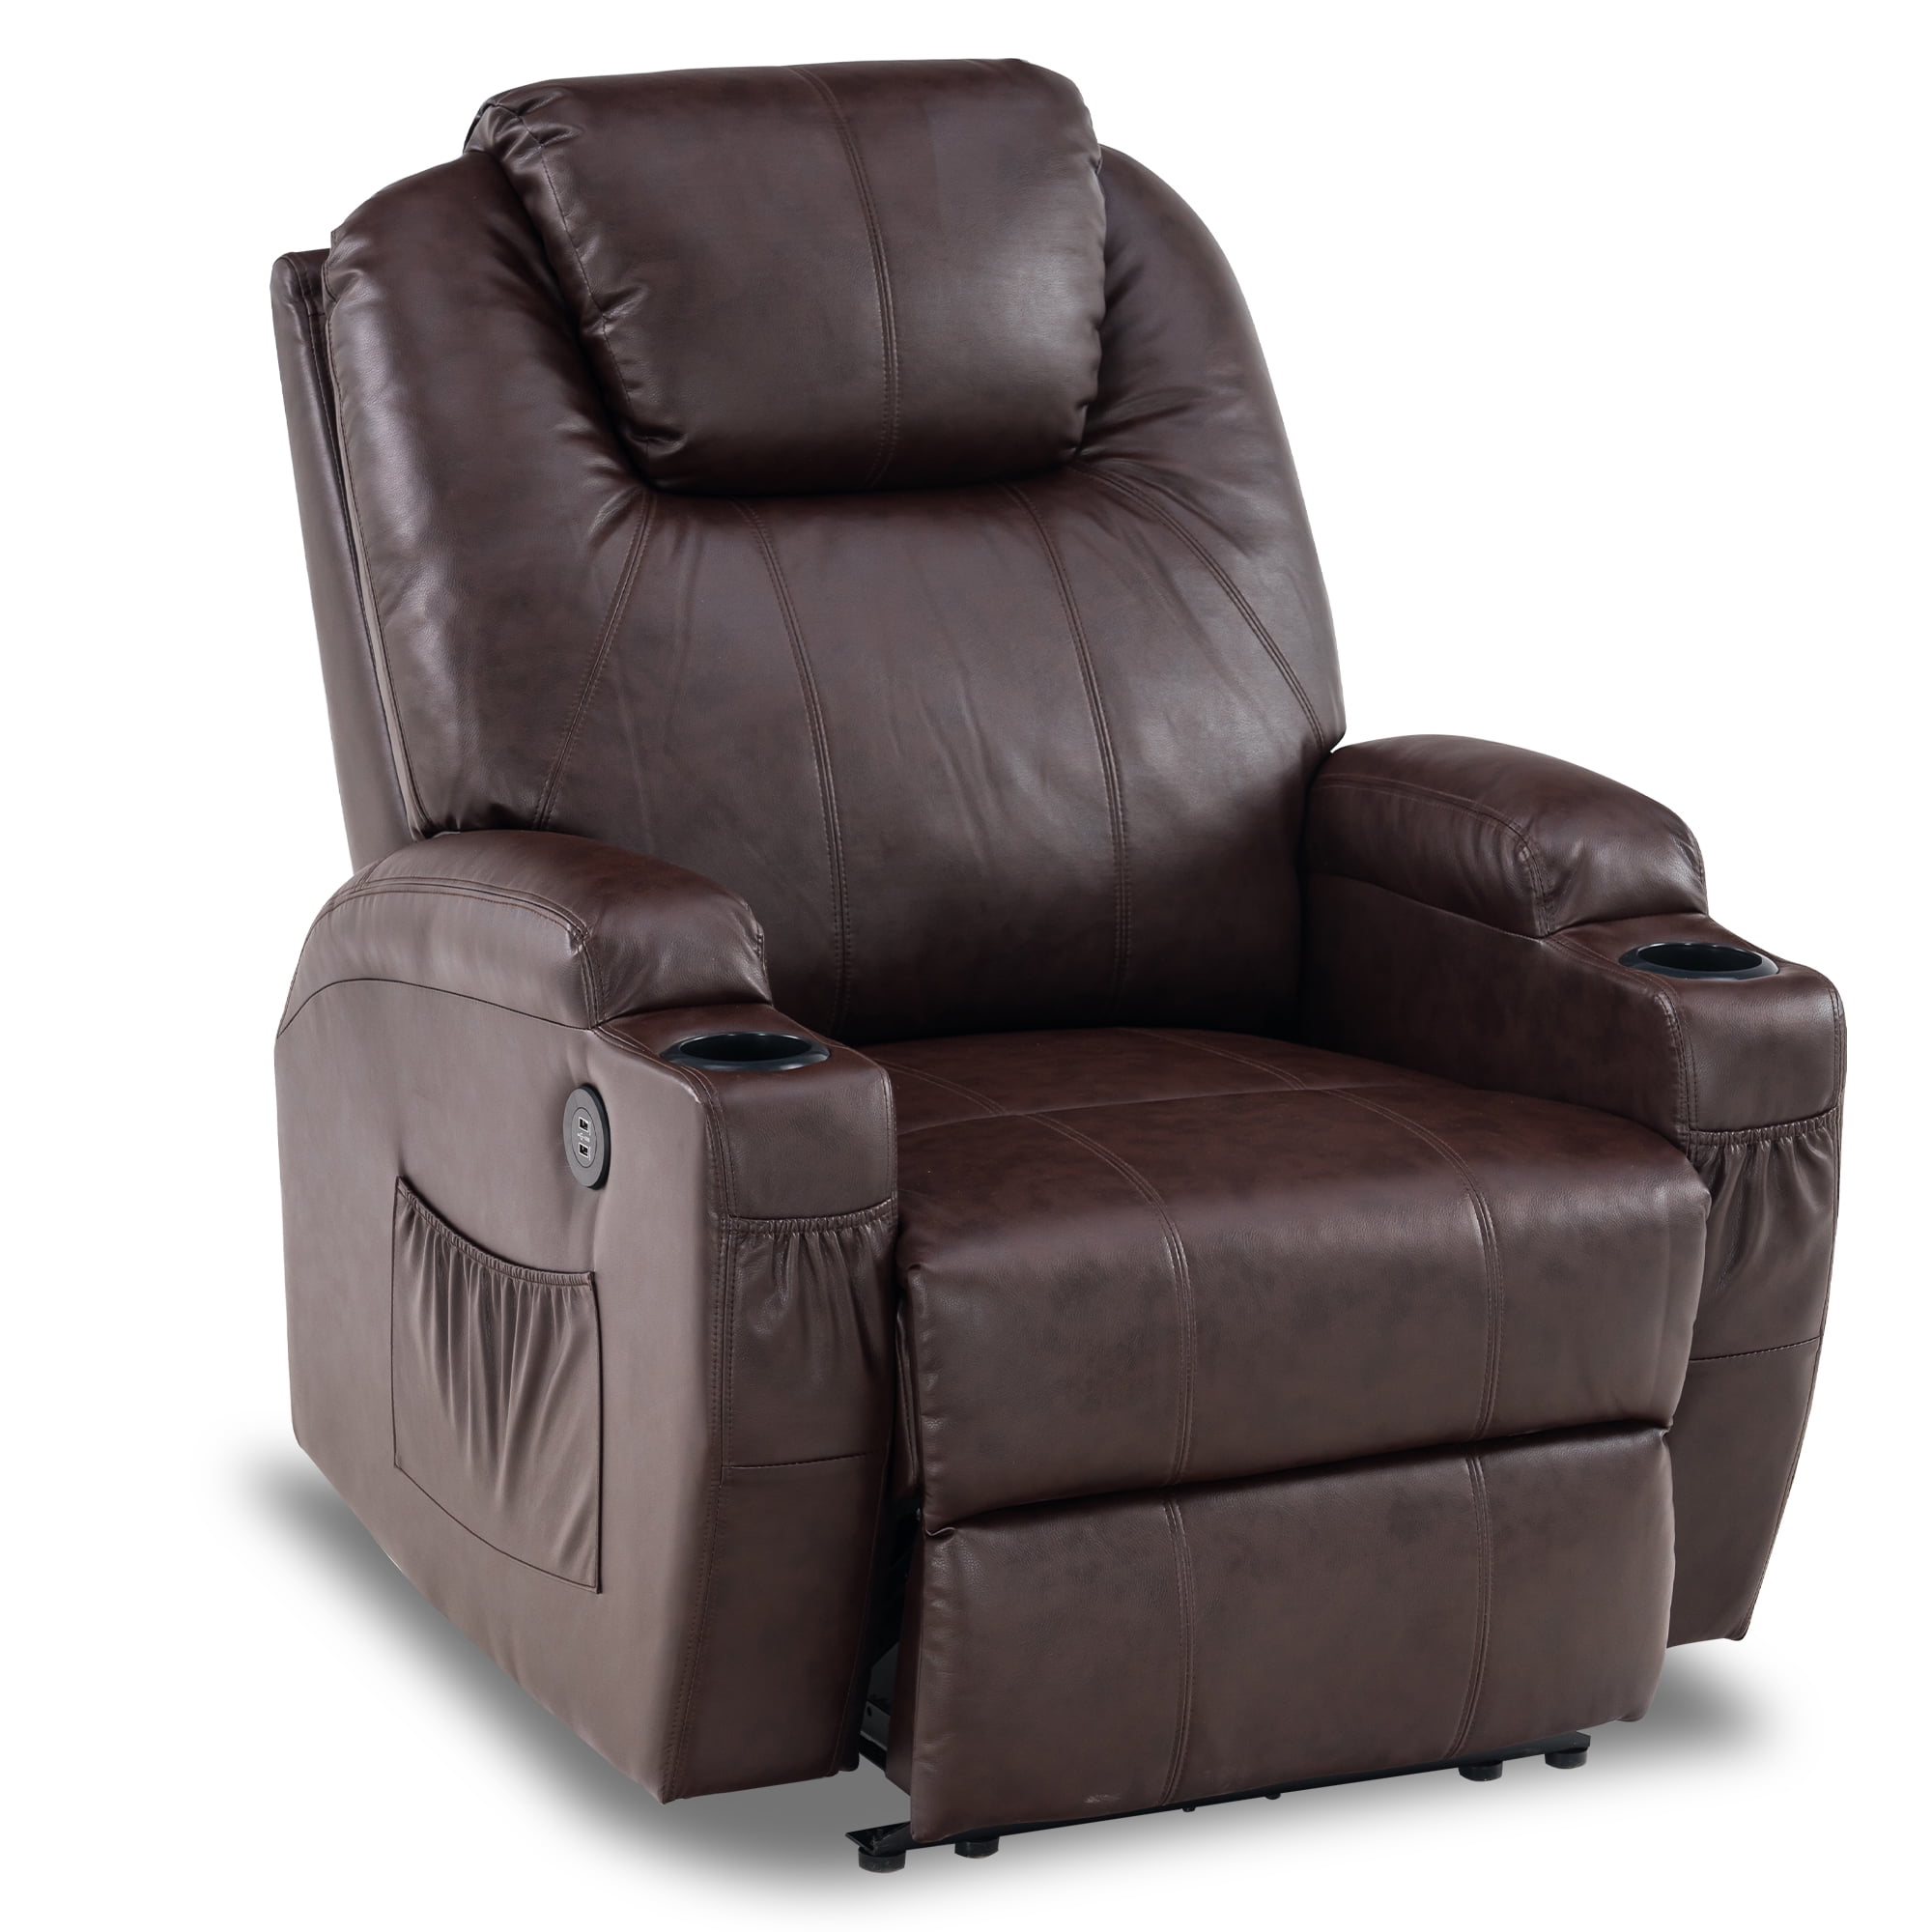 YOURLITE Electric Power Lift Recliner Chair Wireless Remote Control Massage Sofa for Senior Elderly Heated Vibration Massage Sofa with USB Port Faux Leather for Living Room/Bedroom/Media Room Brown